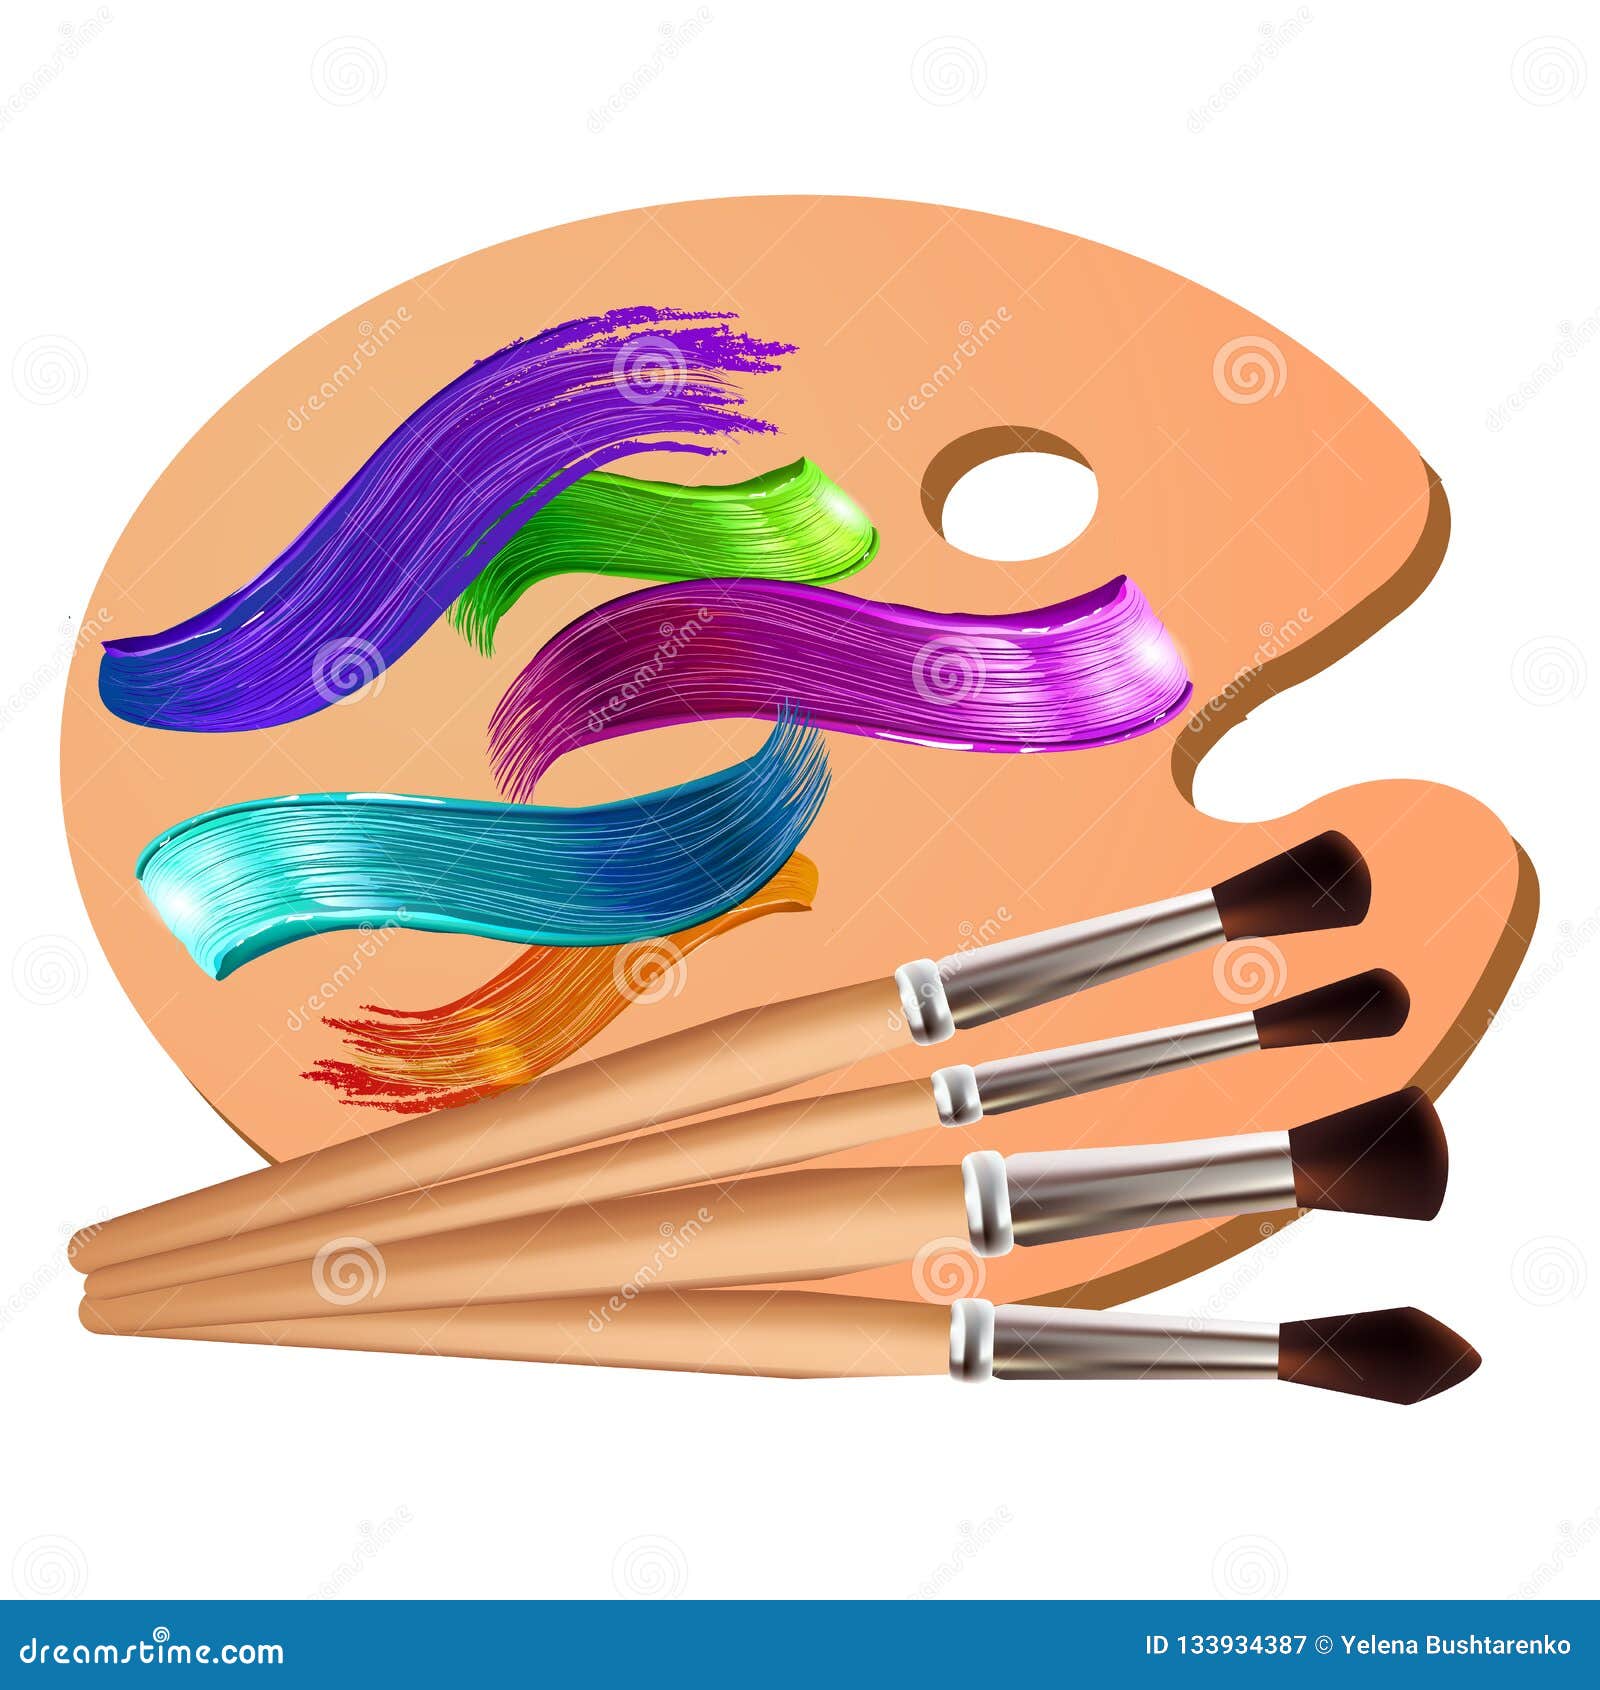 Drawing Tools Cartoon Elements Colorful Vector Concept. Art Supplies:  Palette, Brushes, Watercolor Background Stock Vector - Illustration of  blot, artistic: 133934387